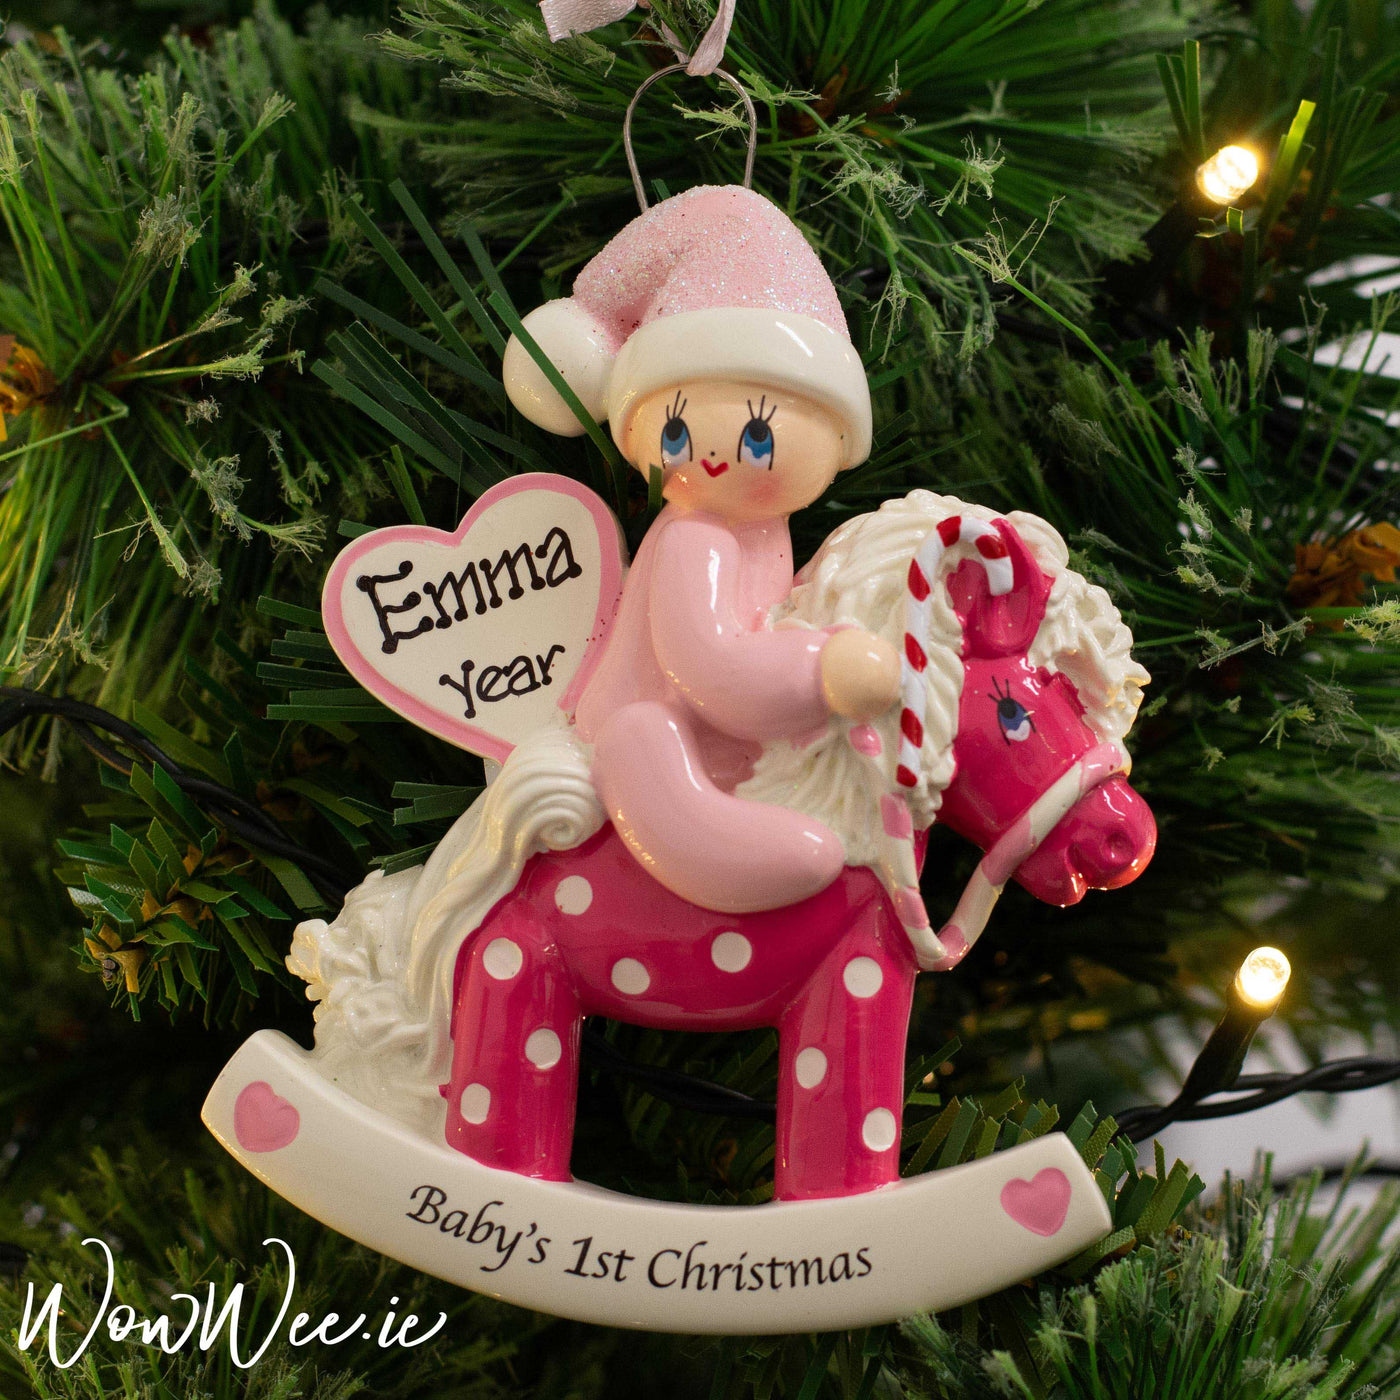 Personalised  Baby's 1st Christmas Ornament - Pink Rocking Horse - WowWee.ie Personalised Gifts